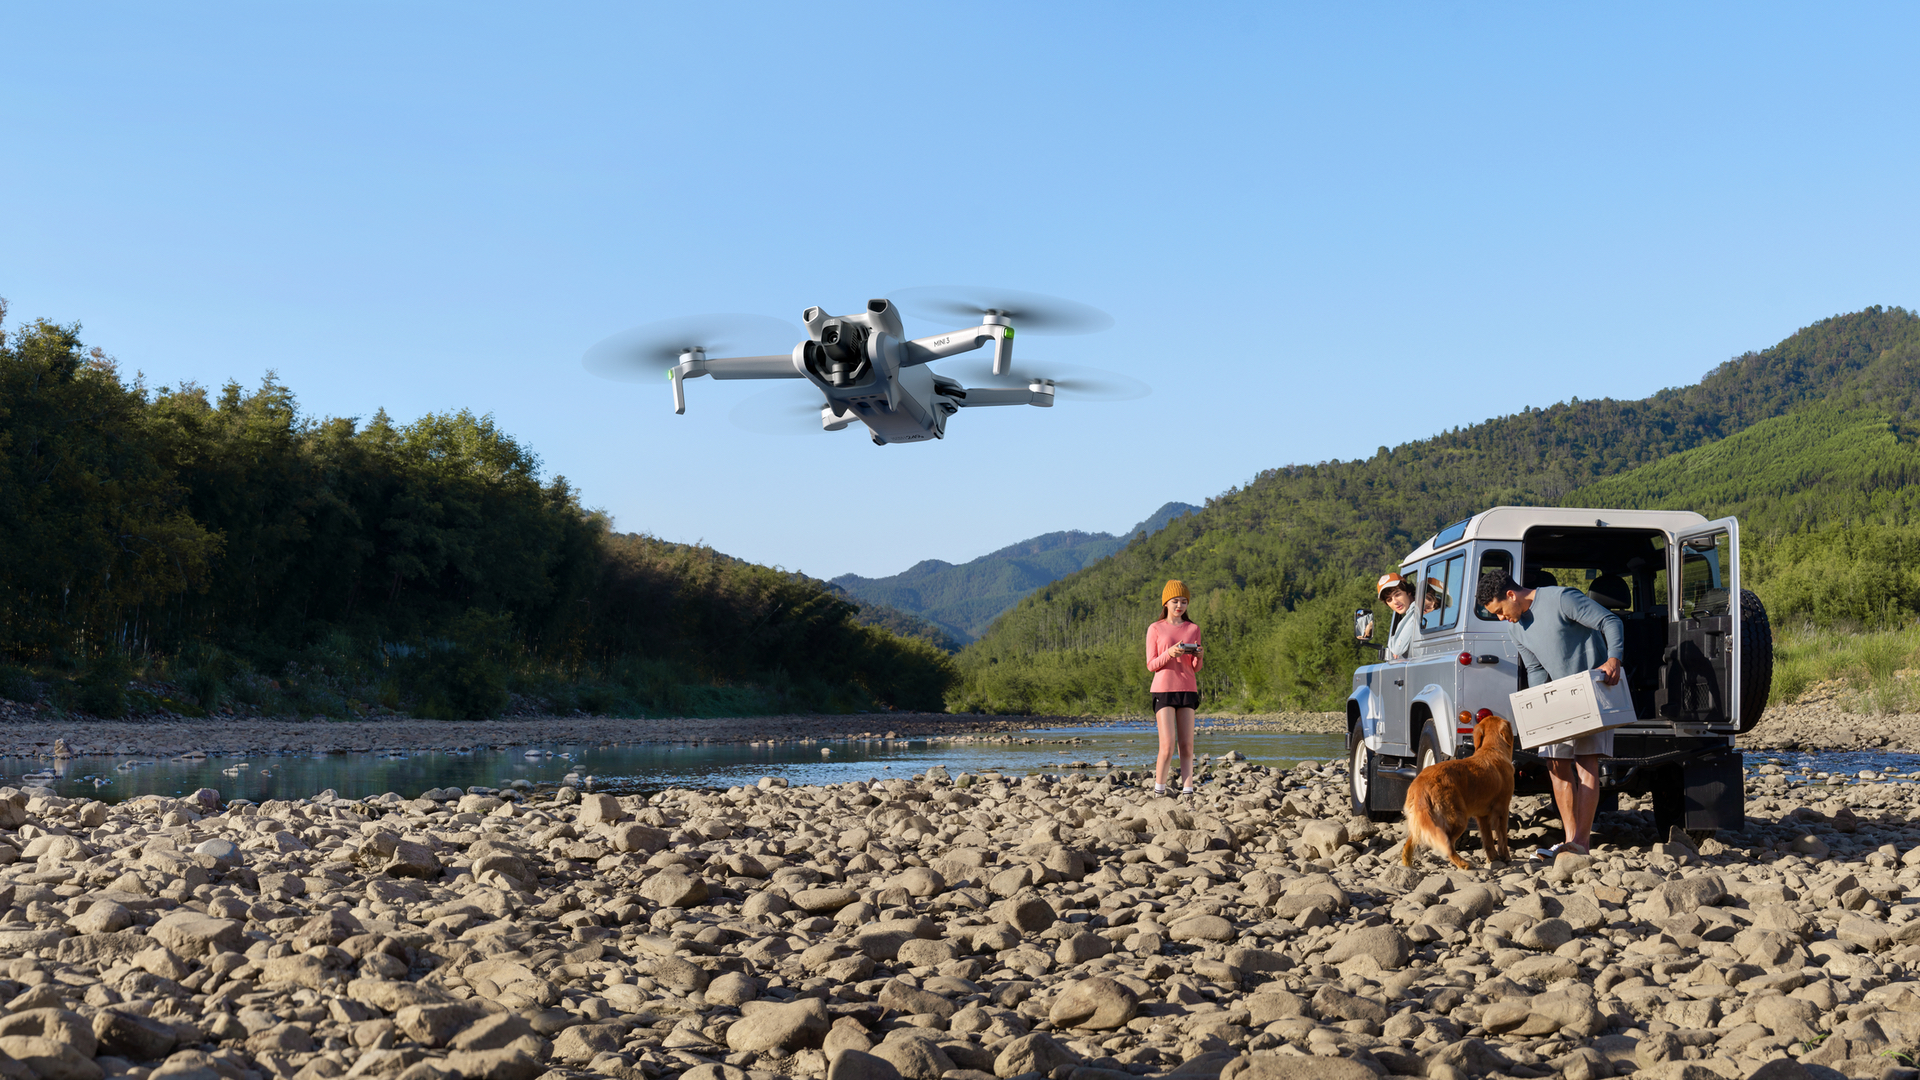 How to Fly a Drone: Beginner's Guide - DJI Guides